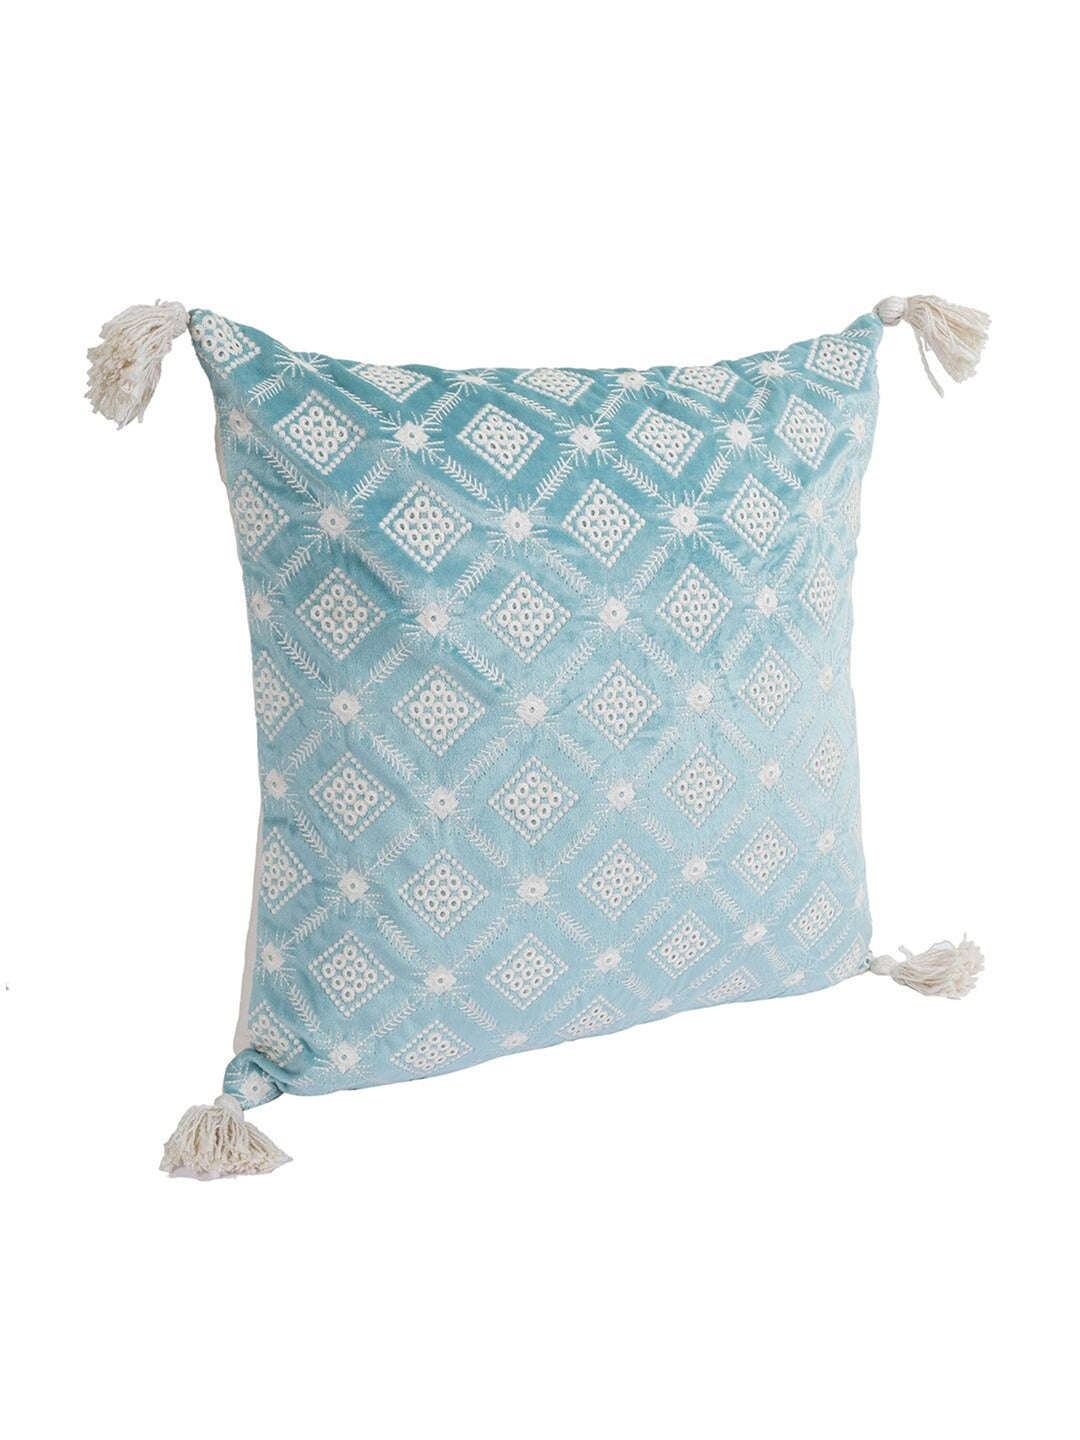 Set of 2 Turquoise Blue Embroidered Velvet Square Cushion Covers